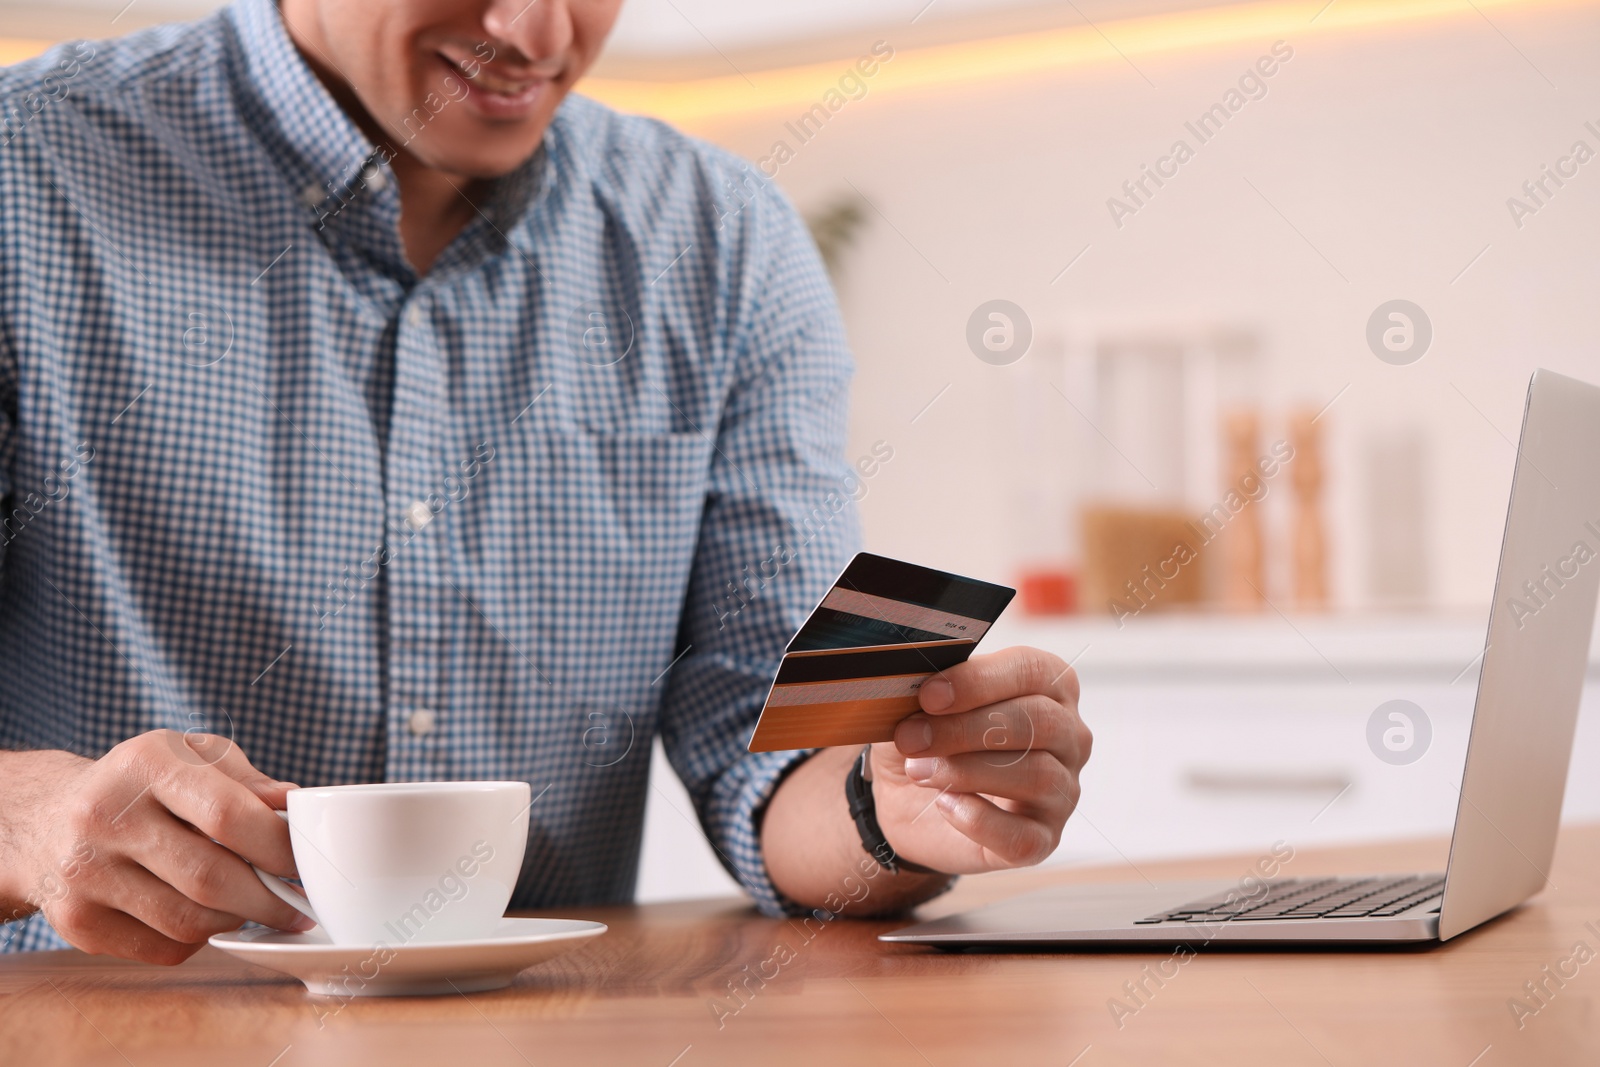 Photo of Man using laptop and credit cards for online payment at table in kitchen, closeup